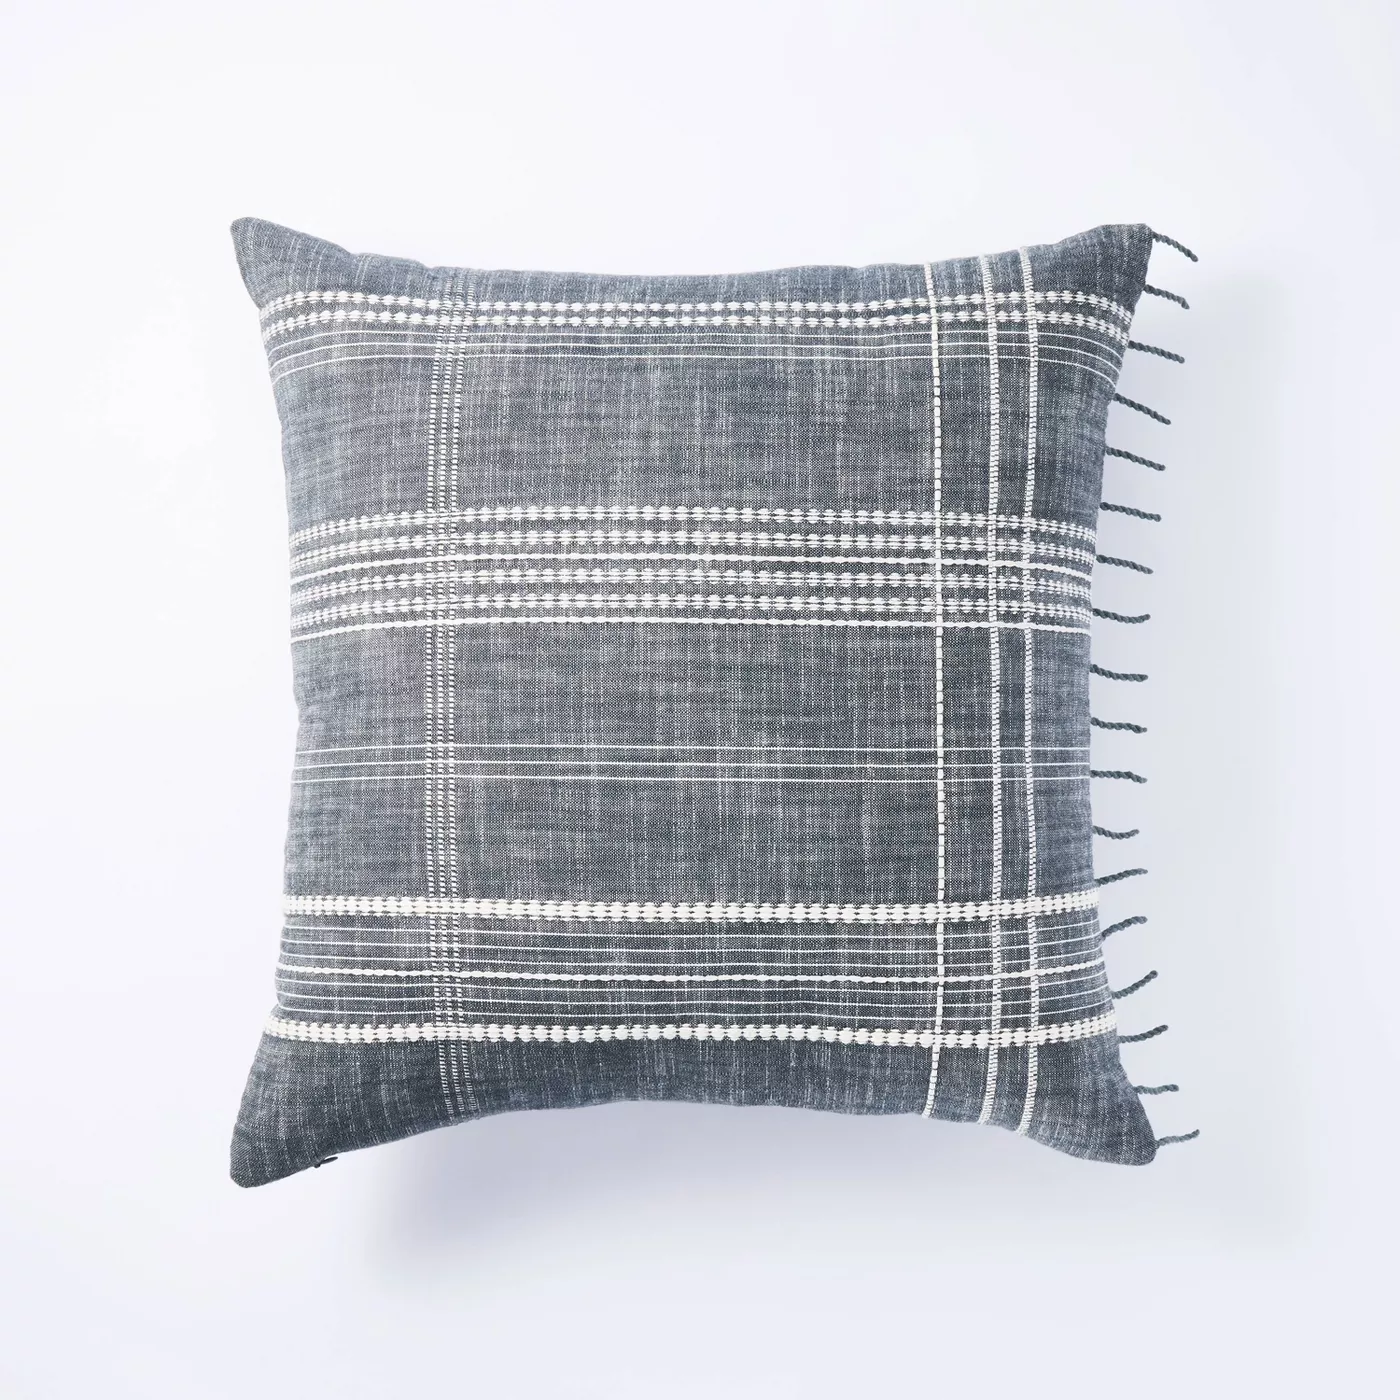 Woven Plaid Pillow Blue - Threshold™ designed with Studio McGee. #throwpillow #homedecor #studiomcgee